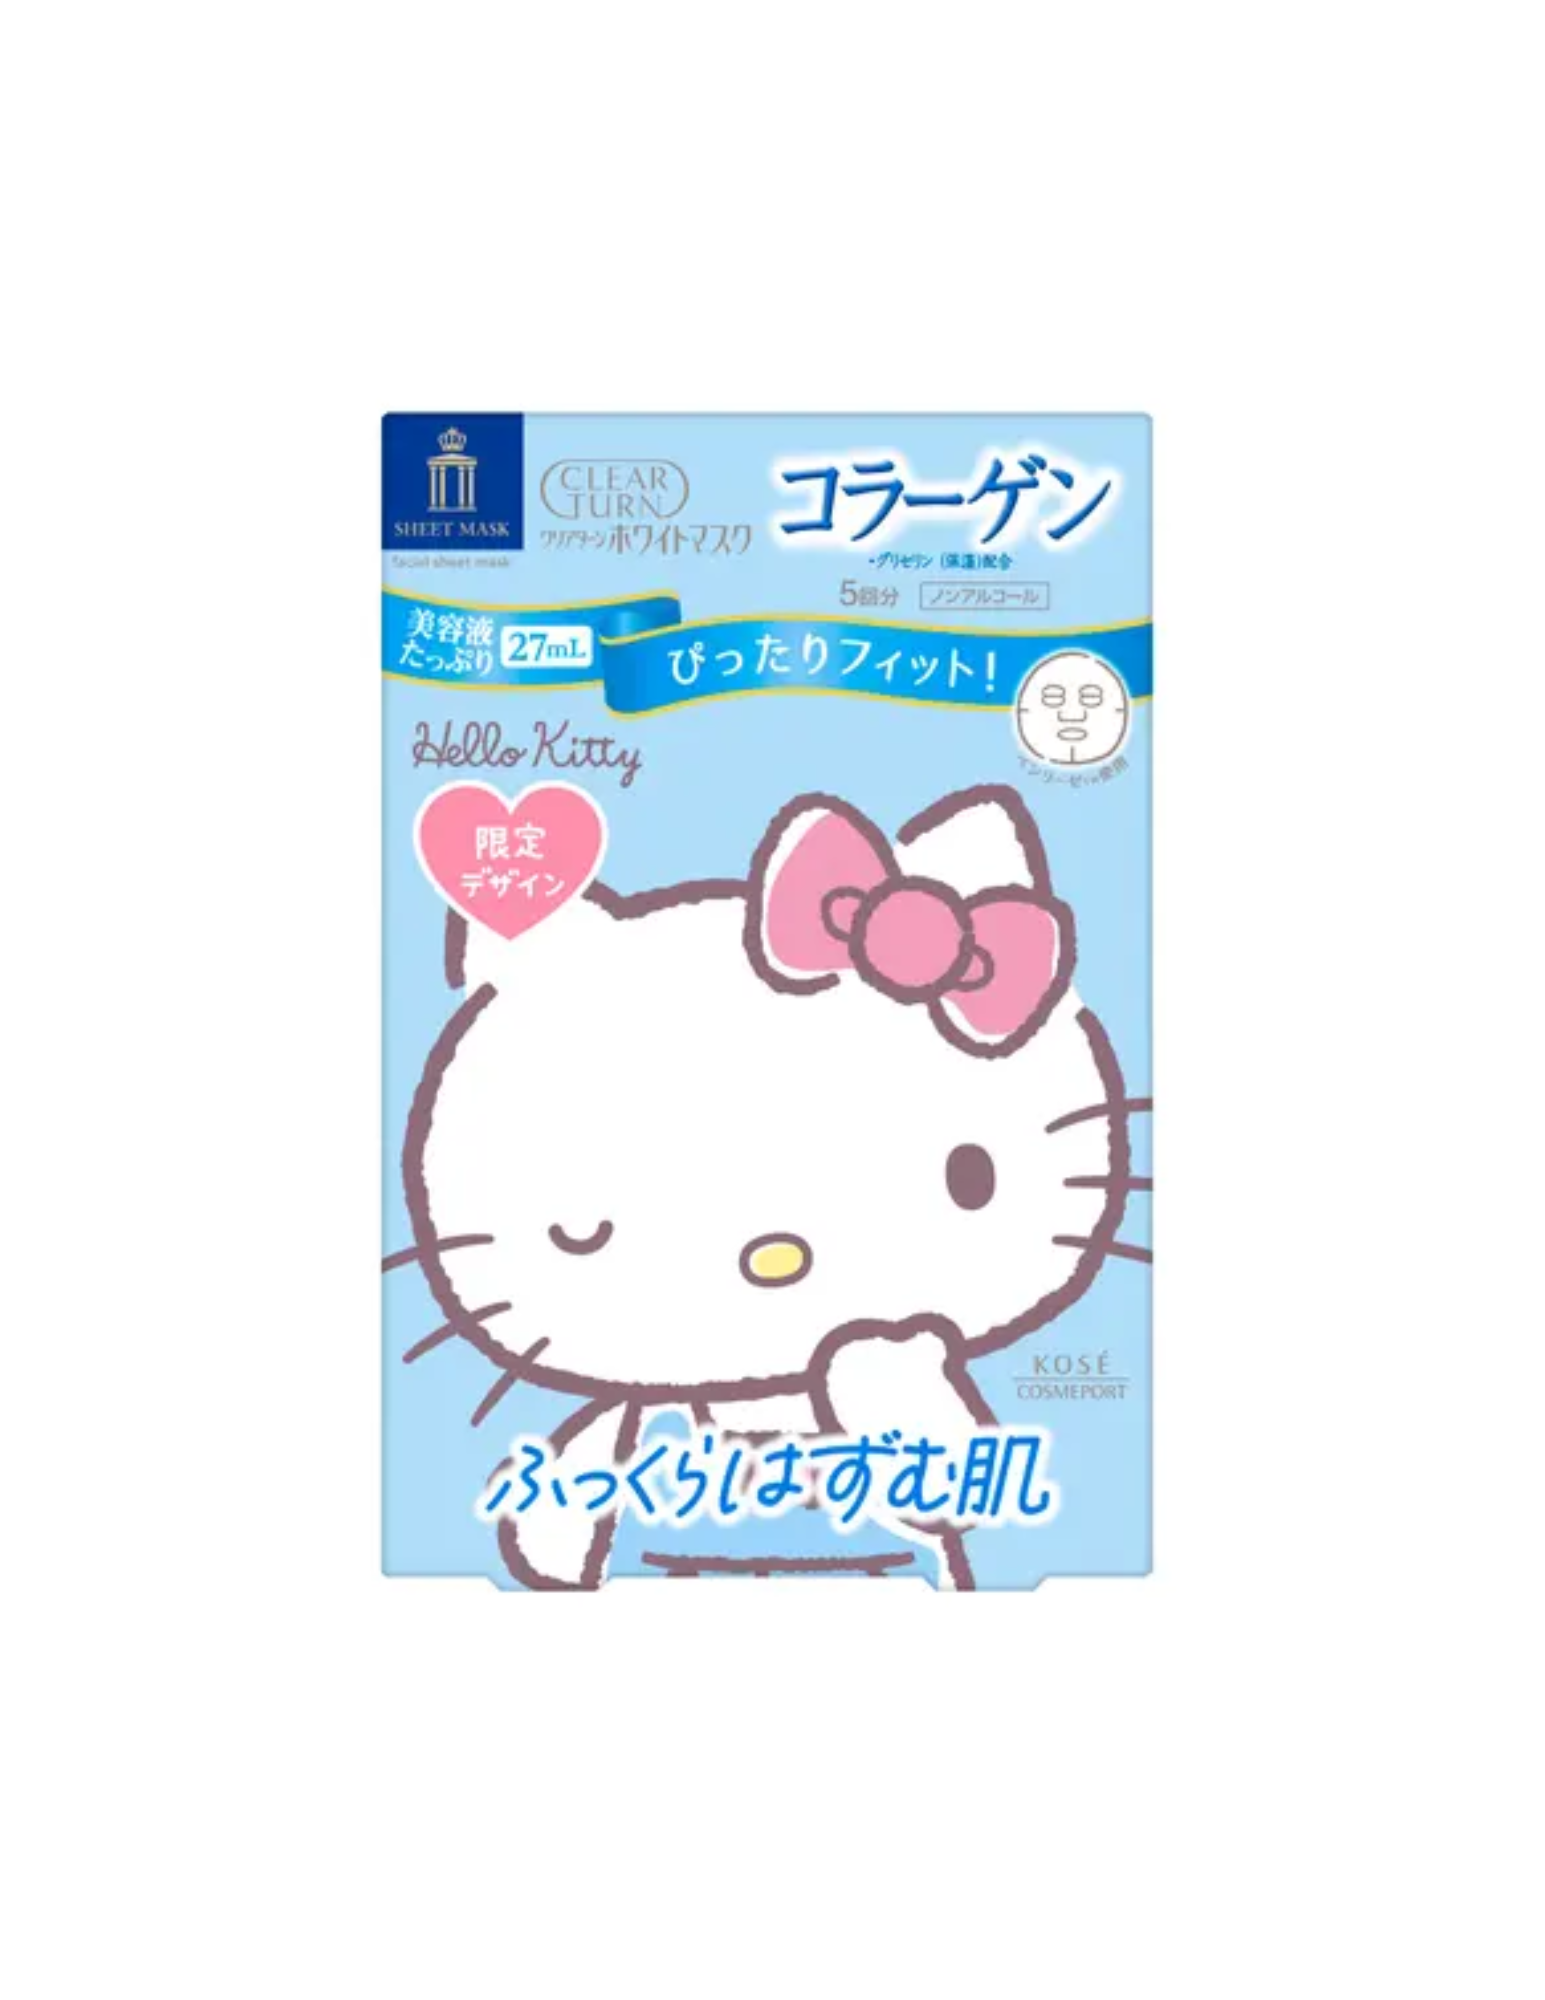 Kose Clear Turn Collagen White Mask | Hello Kitty Limited Edition